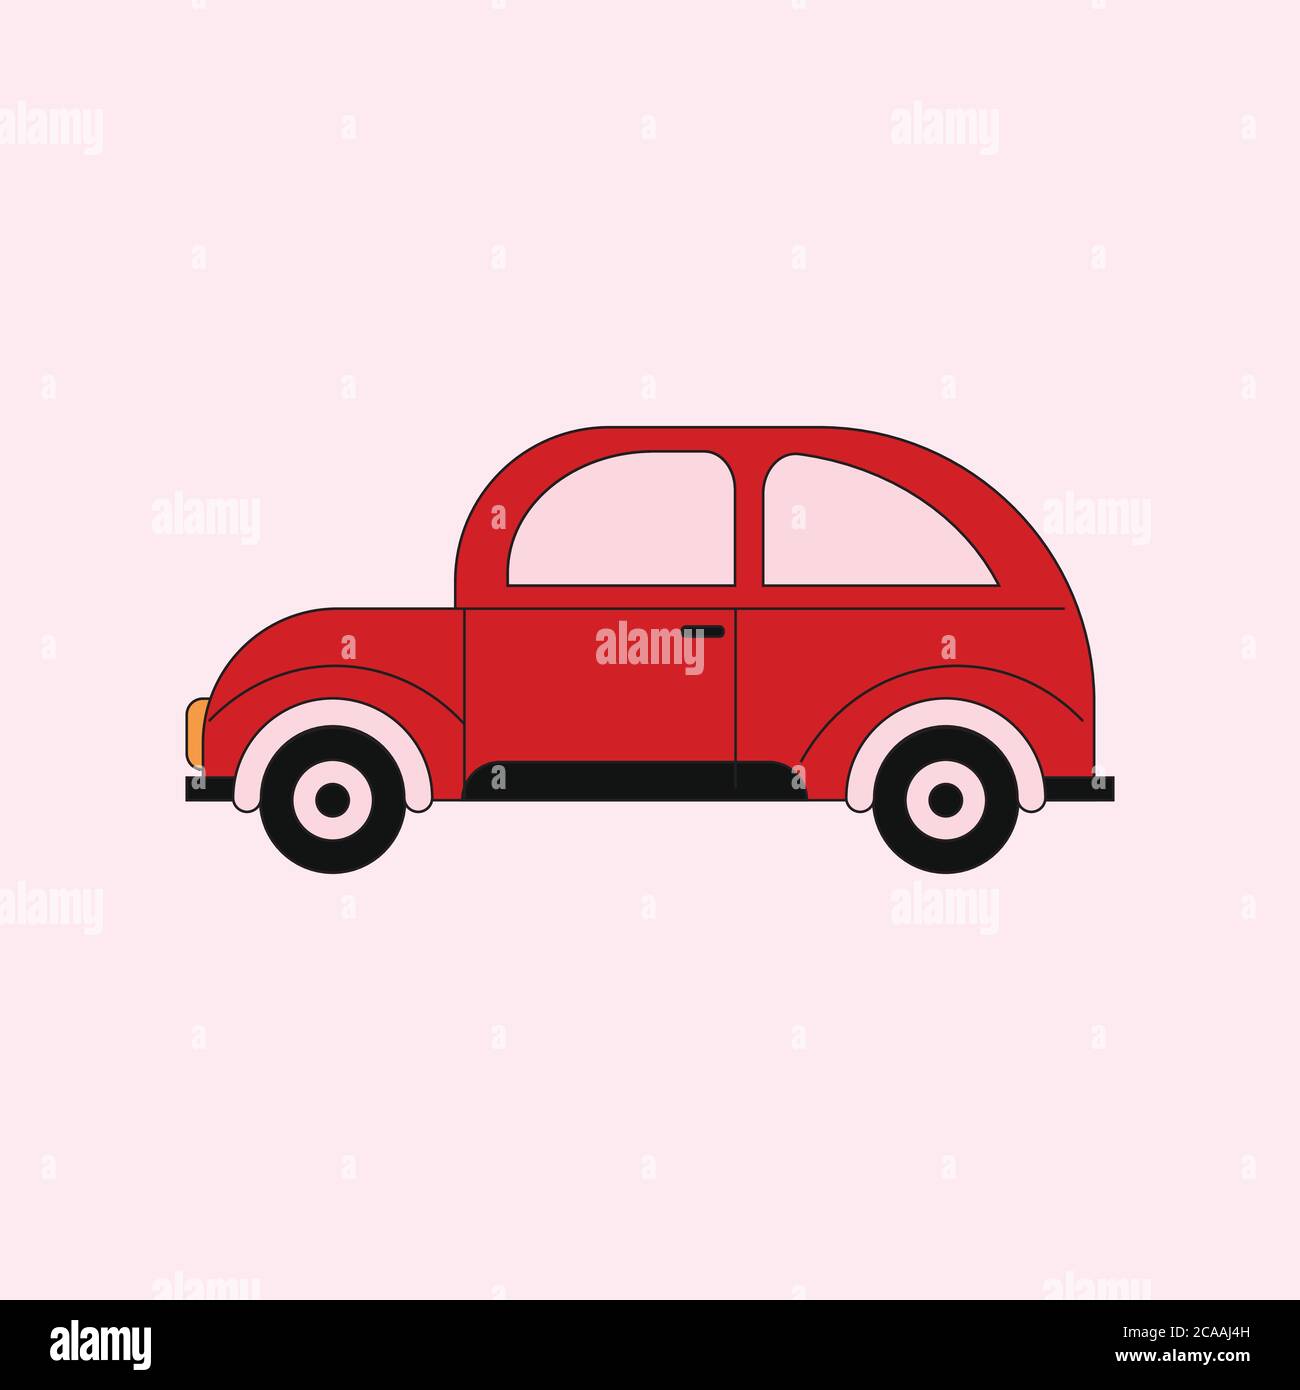 Retro old car design illustration. retro red car vector, old style car on the white background. isolated vintage car Stock Vector